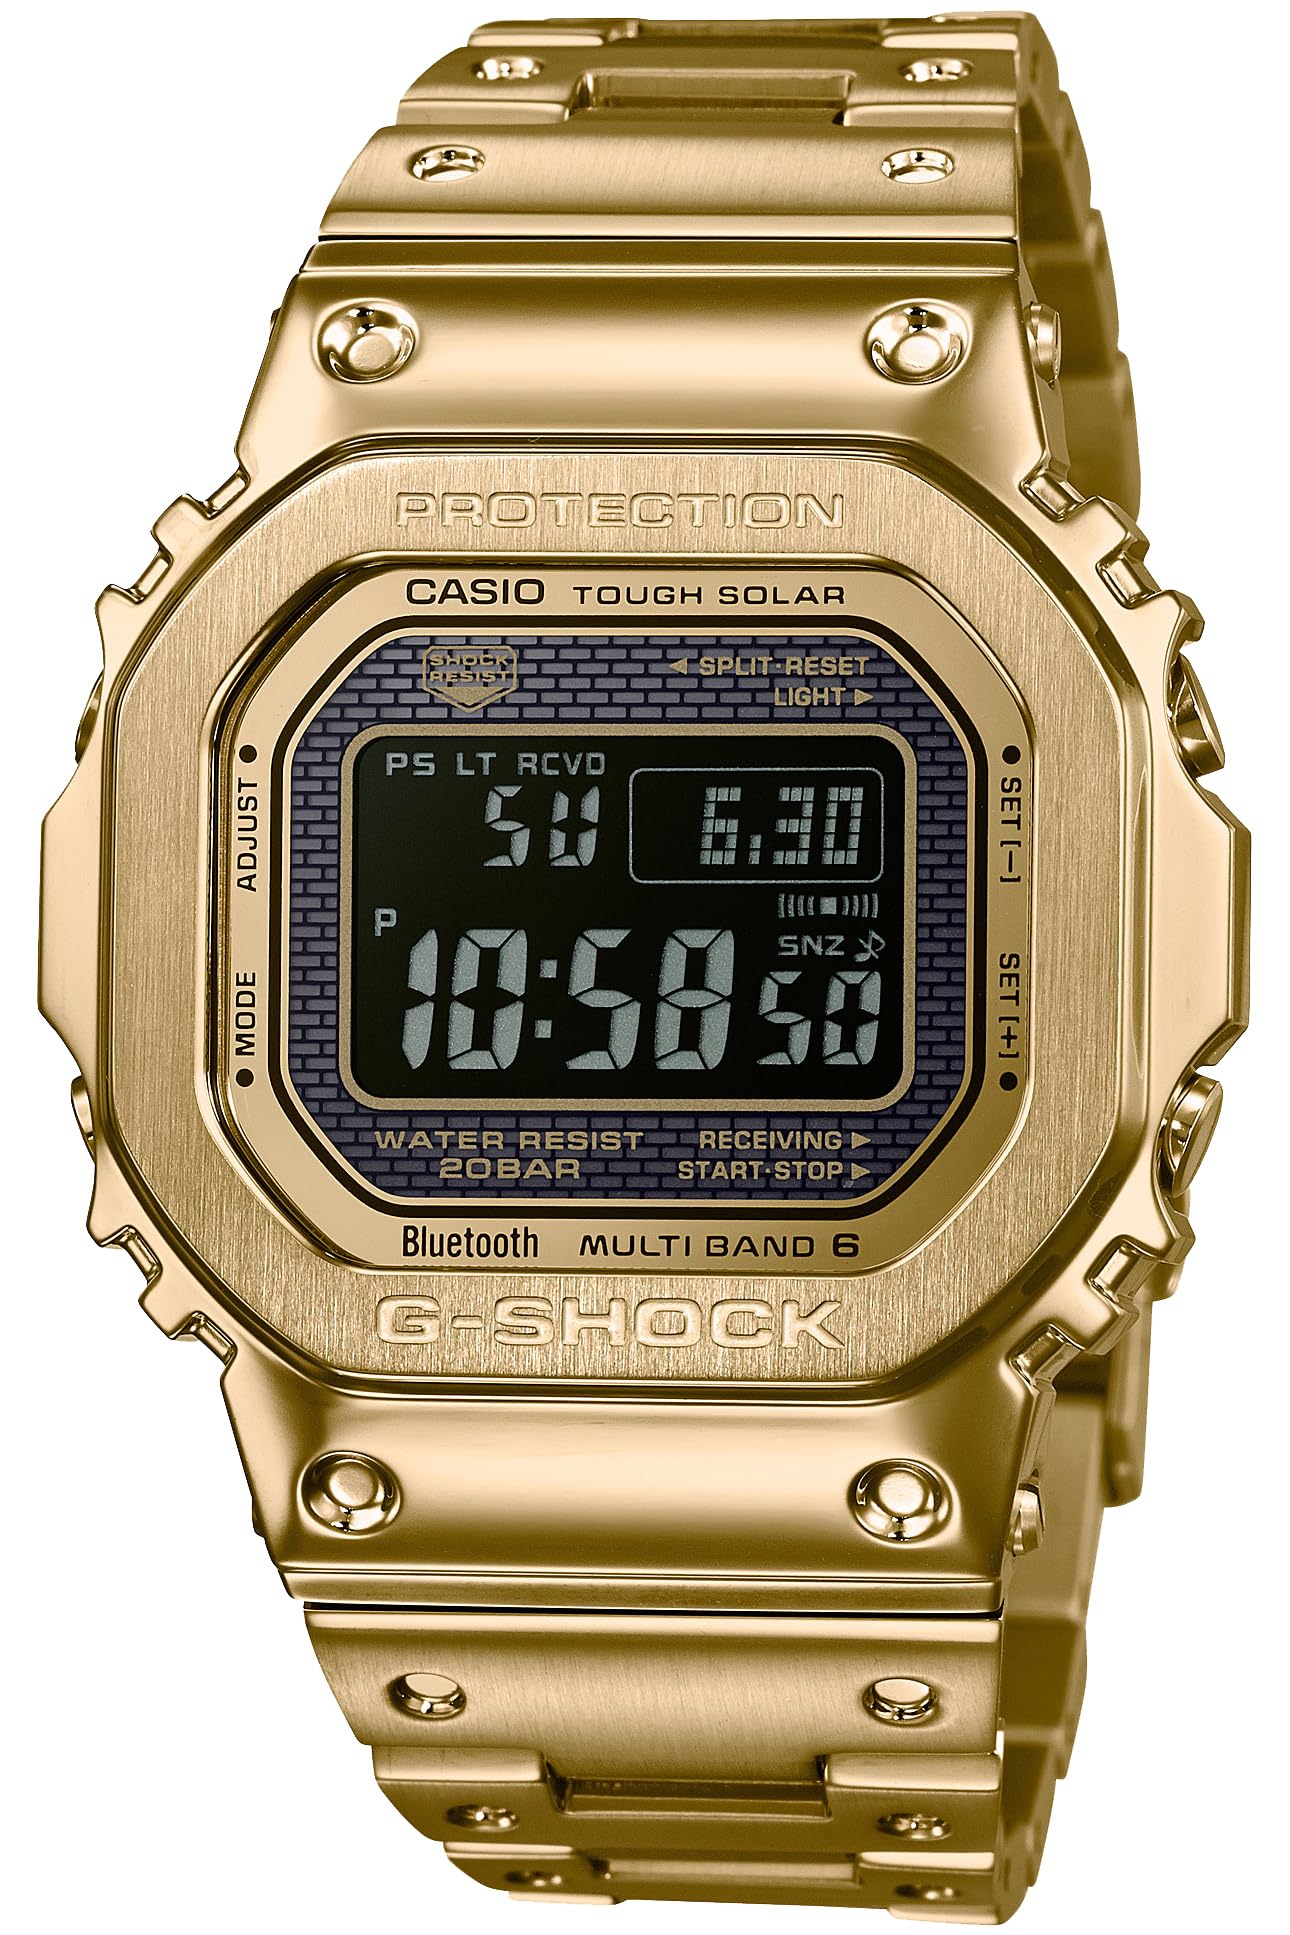 [Casio] G-Shock Watch [Domestic Genuine Product] Equipped with Bluetooth Full Metal Radio Solar GMW-B5000GD-9JF Men's Gold - BanzaiHobby